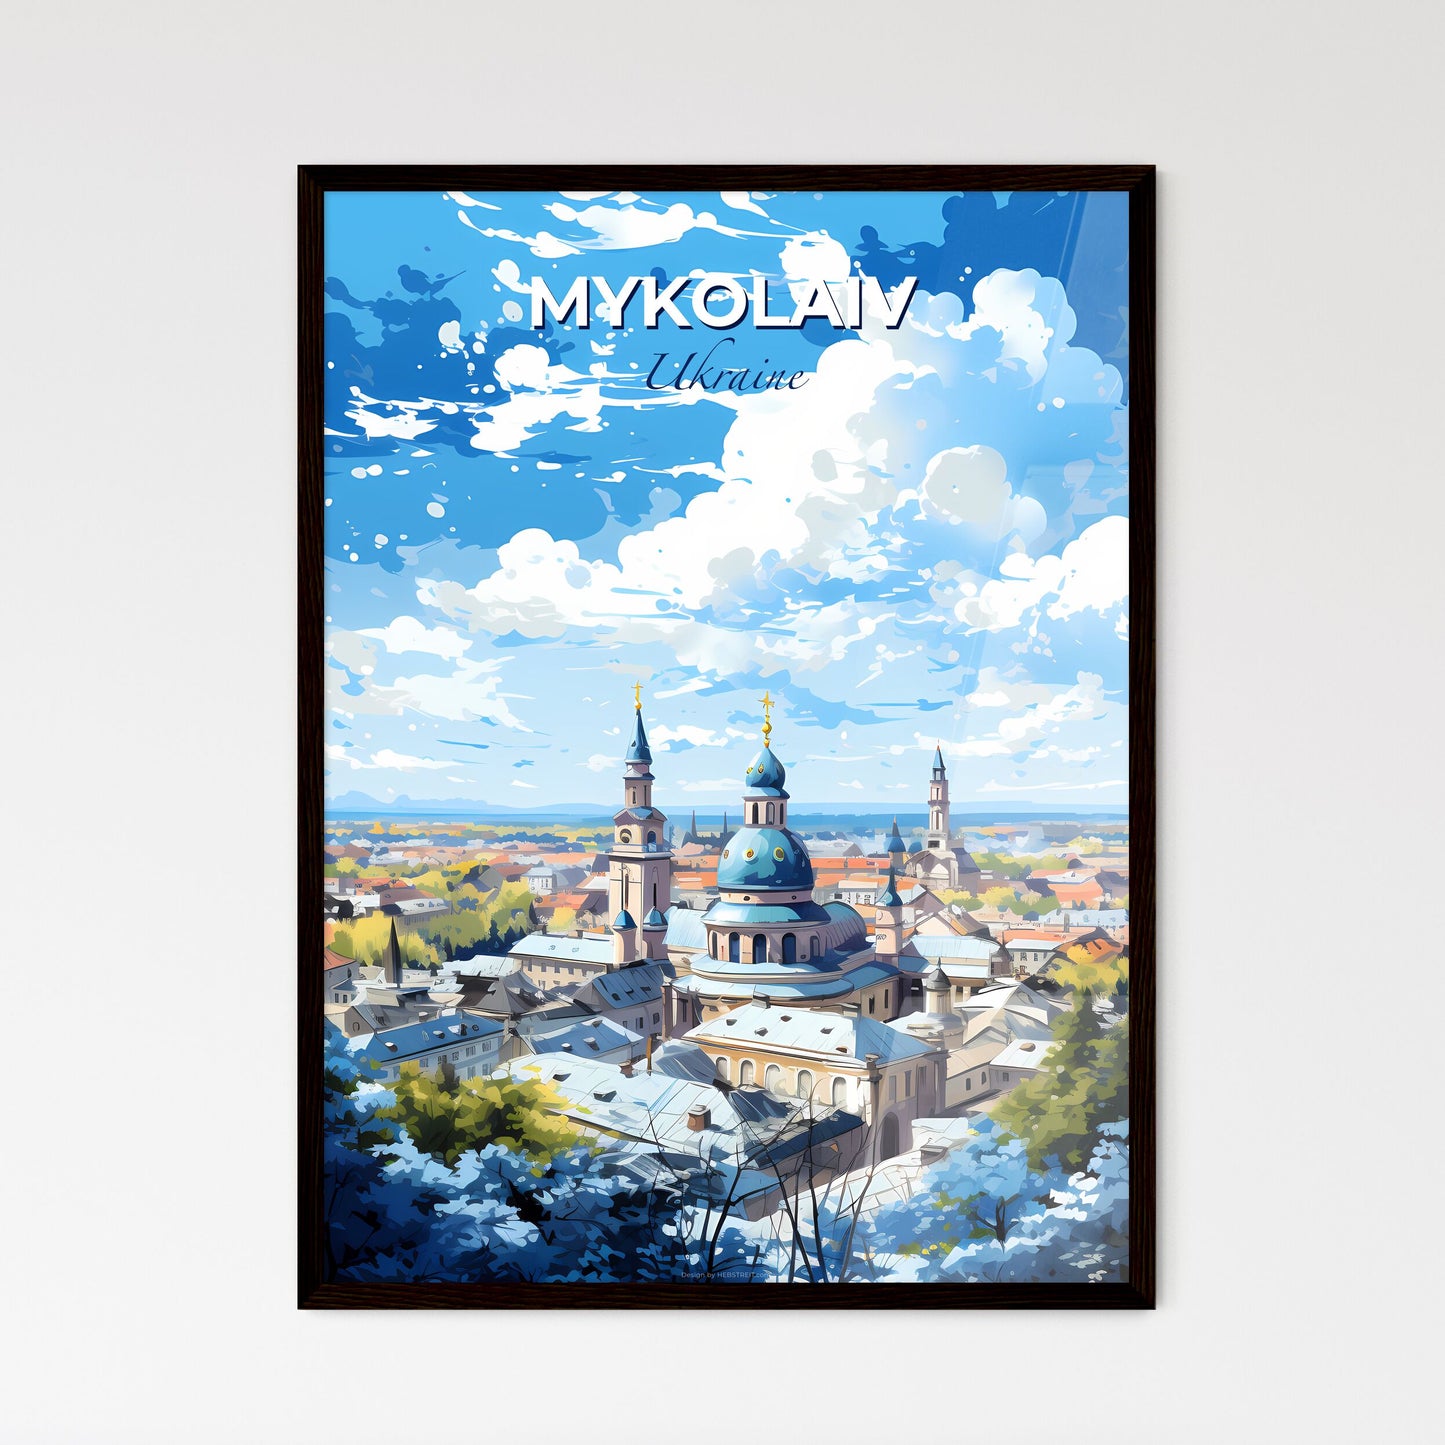 Mykolaiv Ukraine Skyline - A City With Blue Domes And Towers - Customizable Travel Gift Default Title